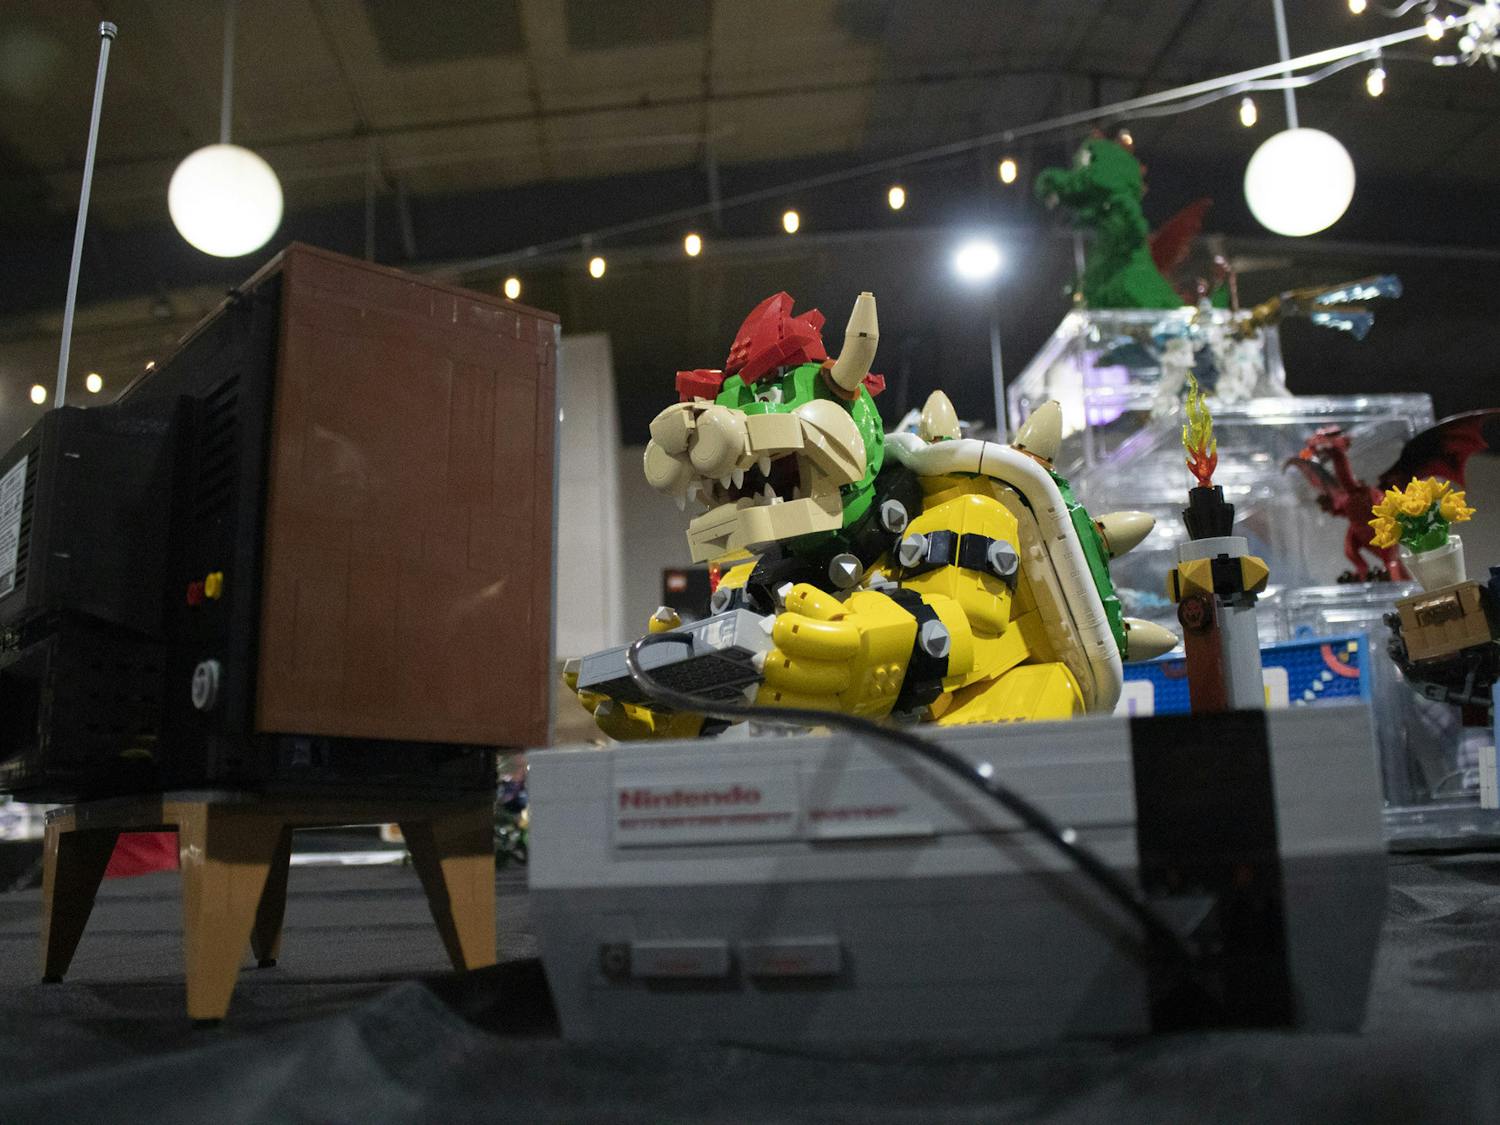 Nintendo’s Bowser Lego set enjoys himself at Columbia Brick Con by playing the LEGO Duck Hunt and LEGO Nintendo 64 sets on March 25, 2023. Many official LEGO sets were put on display as well as free-builds from exhibitors.&nbsp;